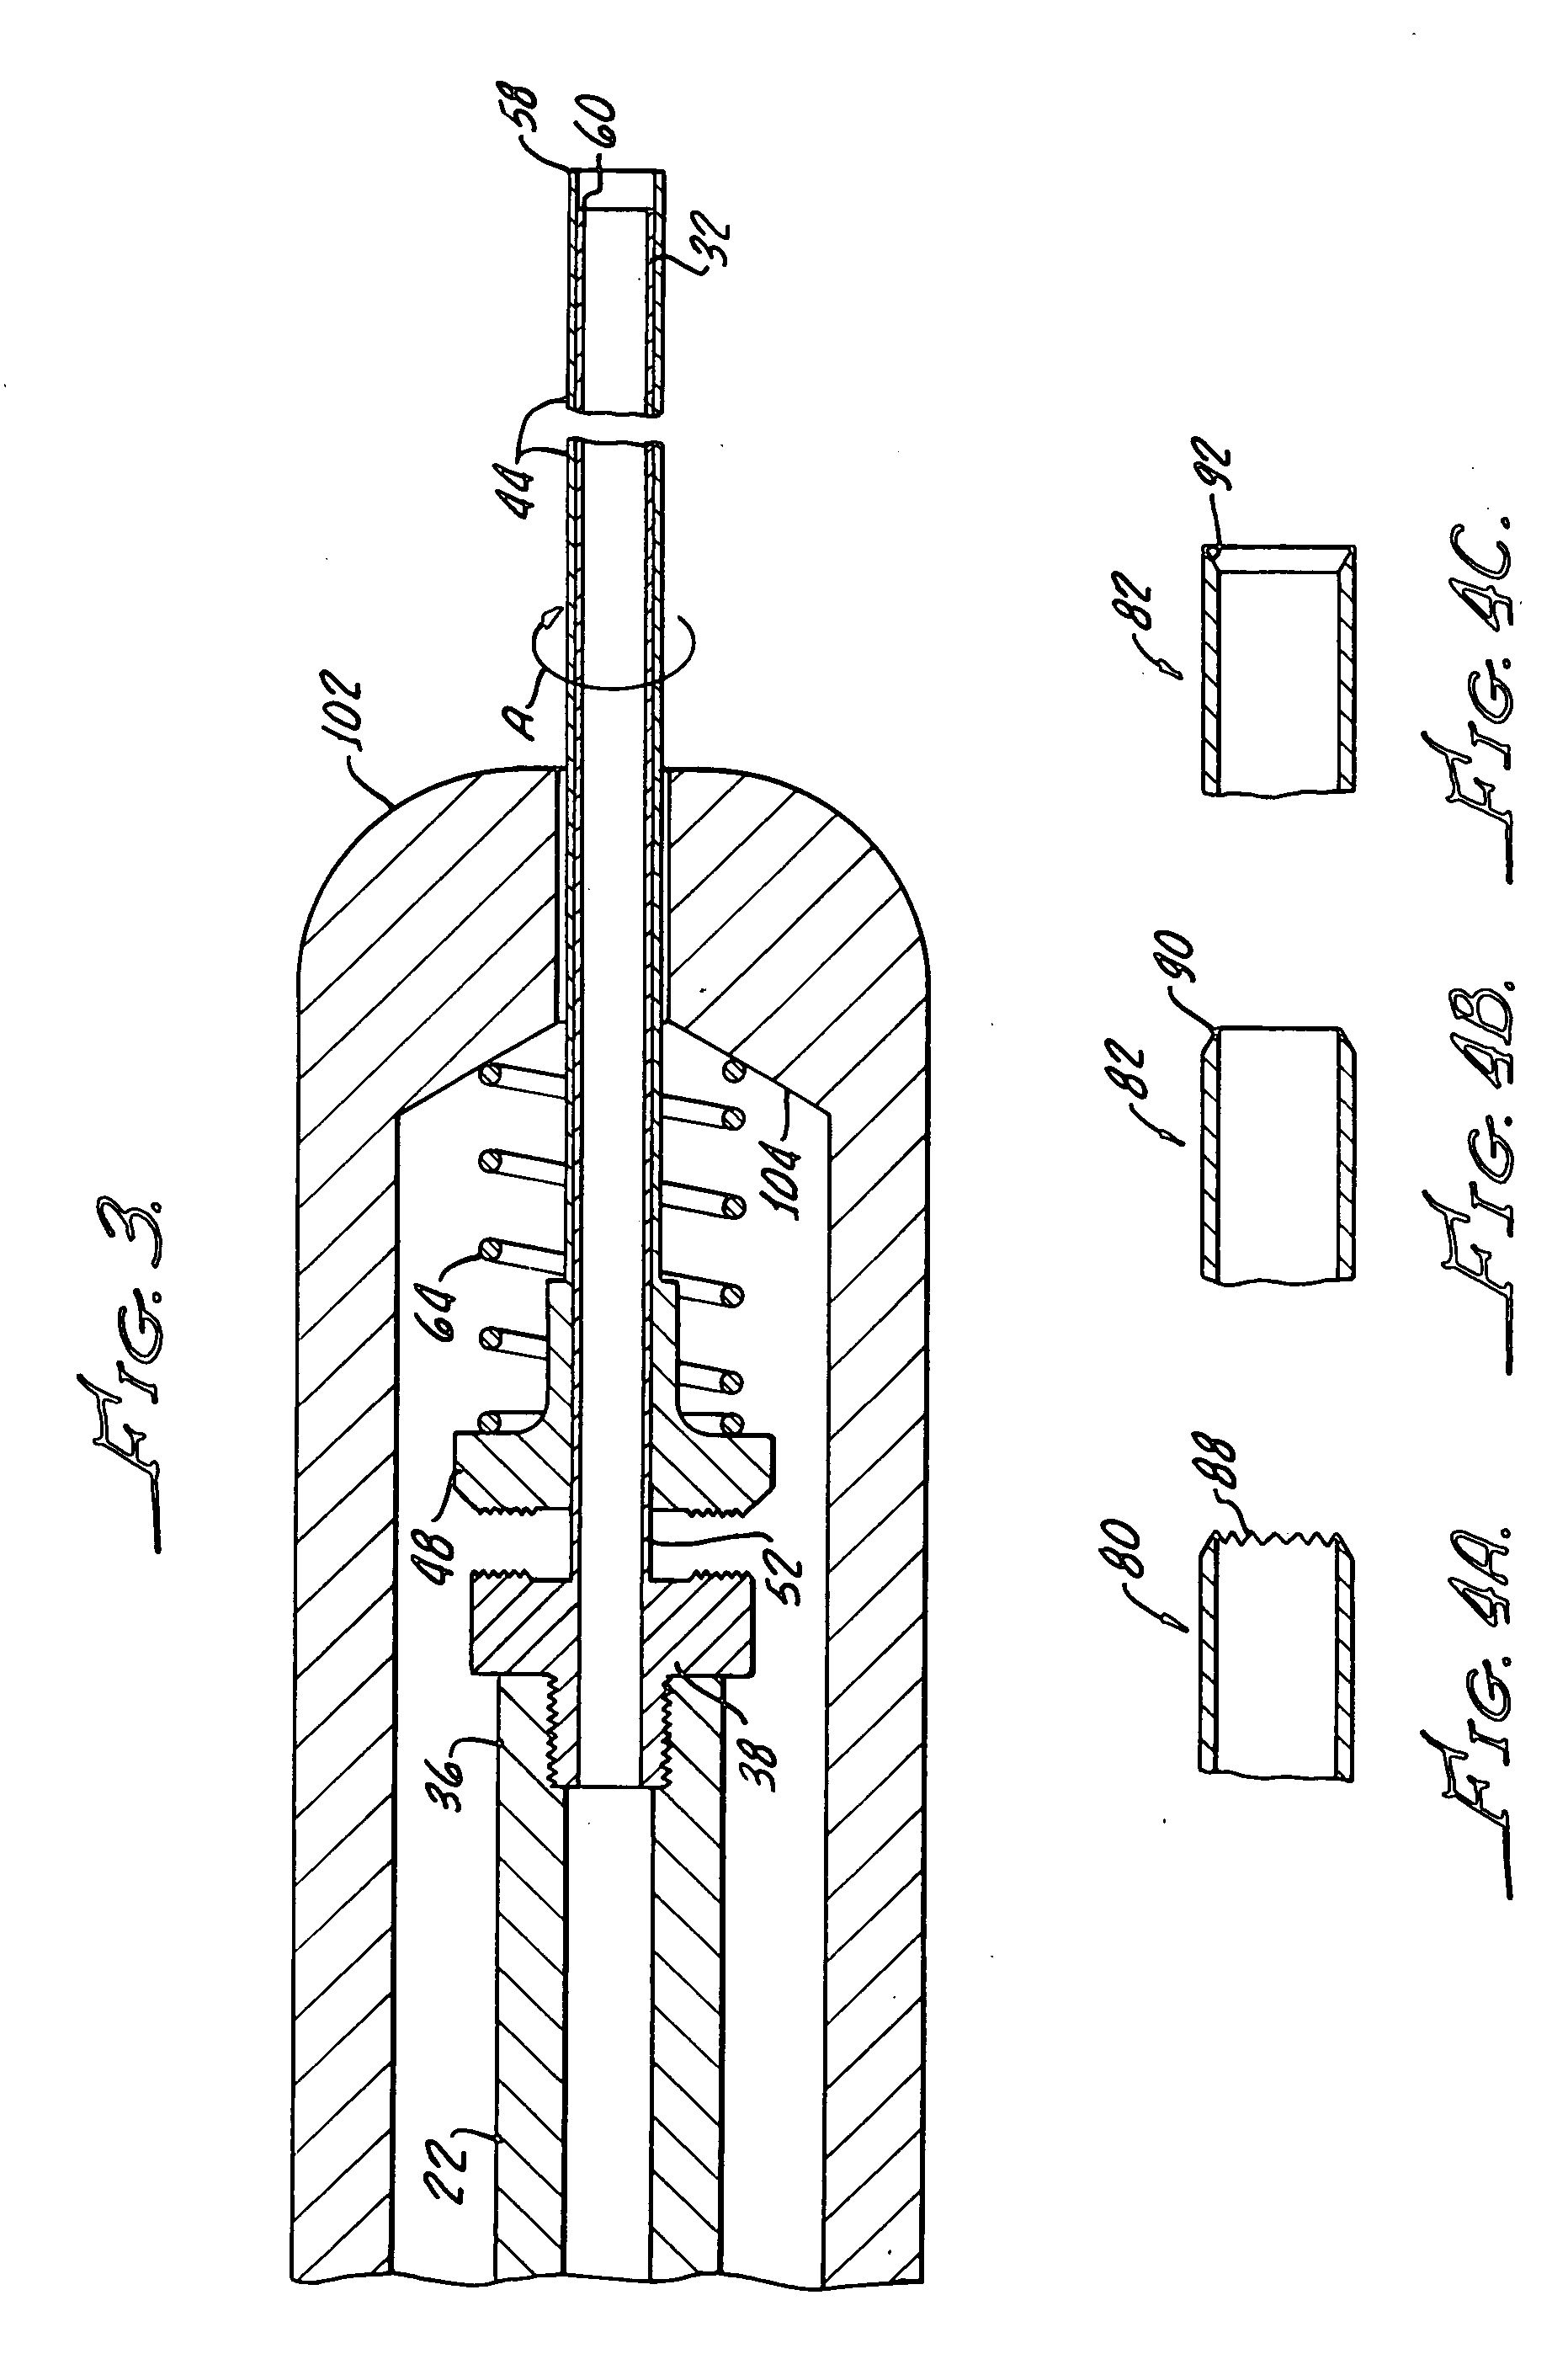 Dual probe with floating inner probe